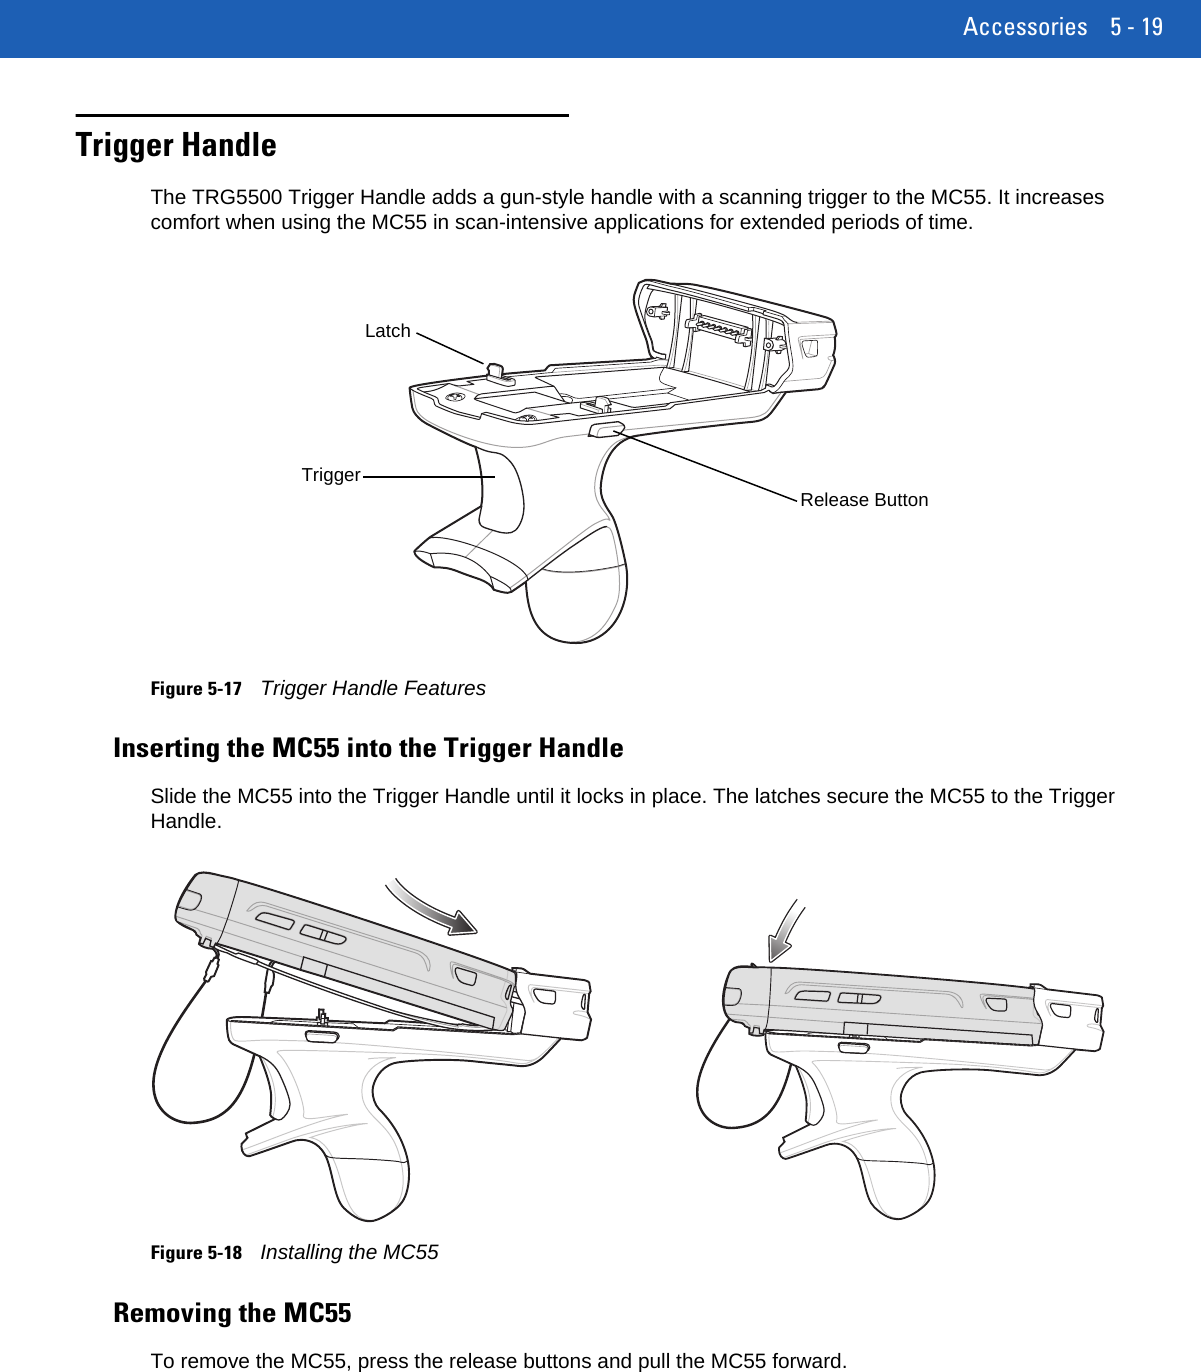 Accessories 5 - 19Trigger HandleThe TRG5500 Trigger Handle adds a gun-style handle with a scanning trigger to the MC55. It increases comfort when using the MC55 in scan-intensive applications for extended periods of time.Figure 5-17Trigger Handle FeaturesInserting the MC55 into the Trigger HandleSlide the MC55 into the Trigger Handle until it locks in place. The latches secure the MC55 to the Trigger Handle.Figure 5-18Installing the MC55Removing the MC55To remove the MC55, press the release buttons and pull the MC55 forward.LatchTriggerRelease Button